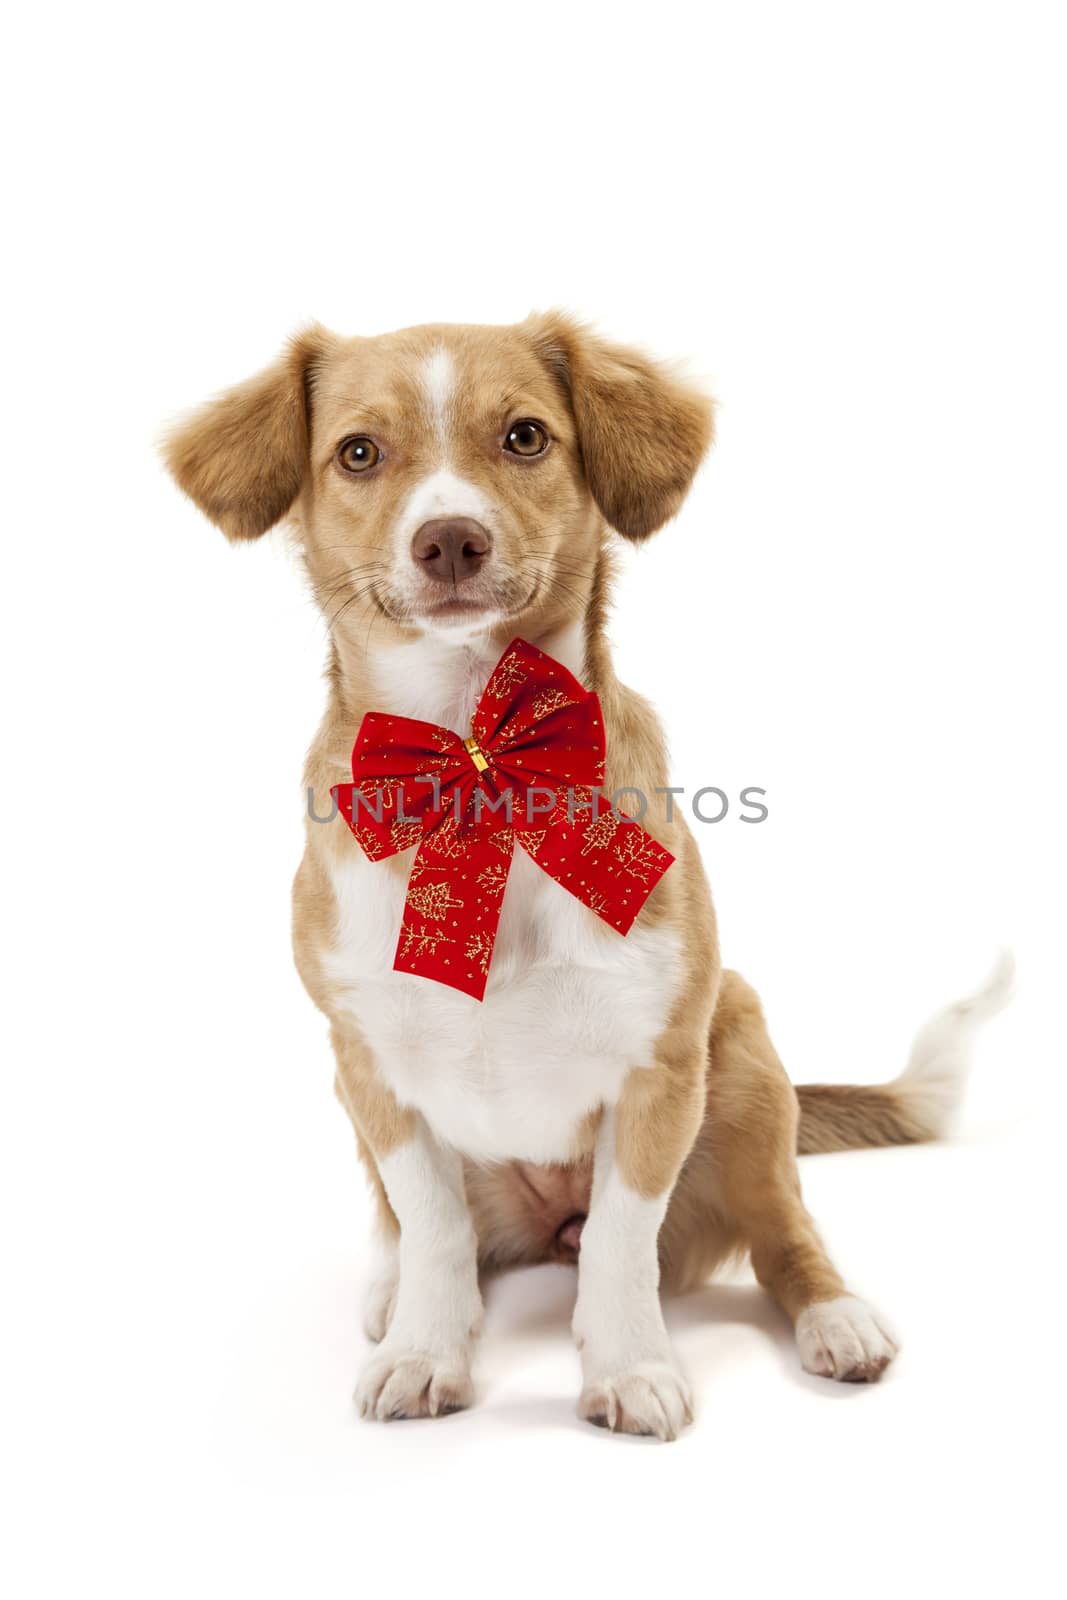 Cute dog wearing red bow by Aarstudio